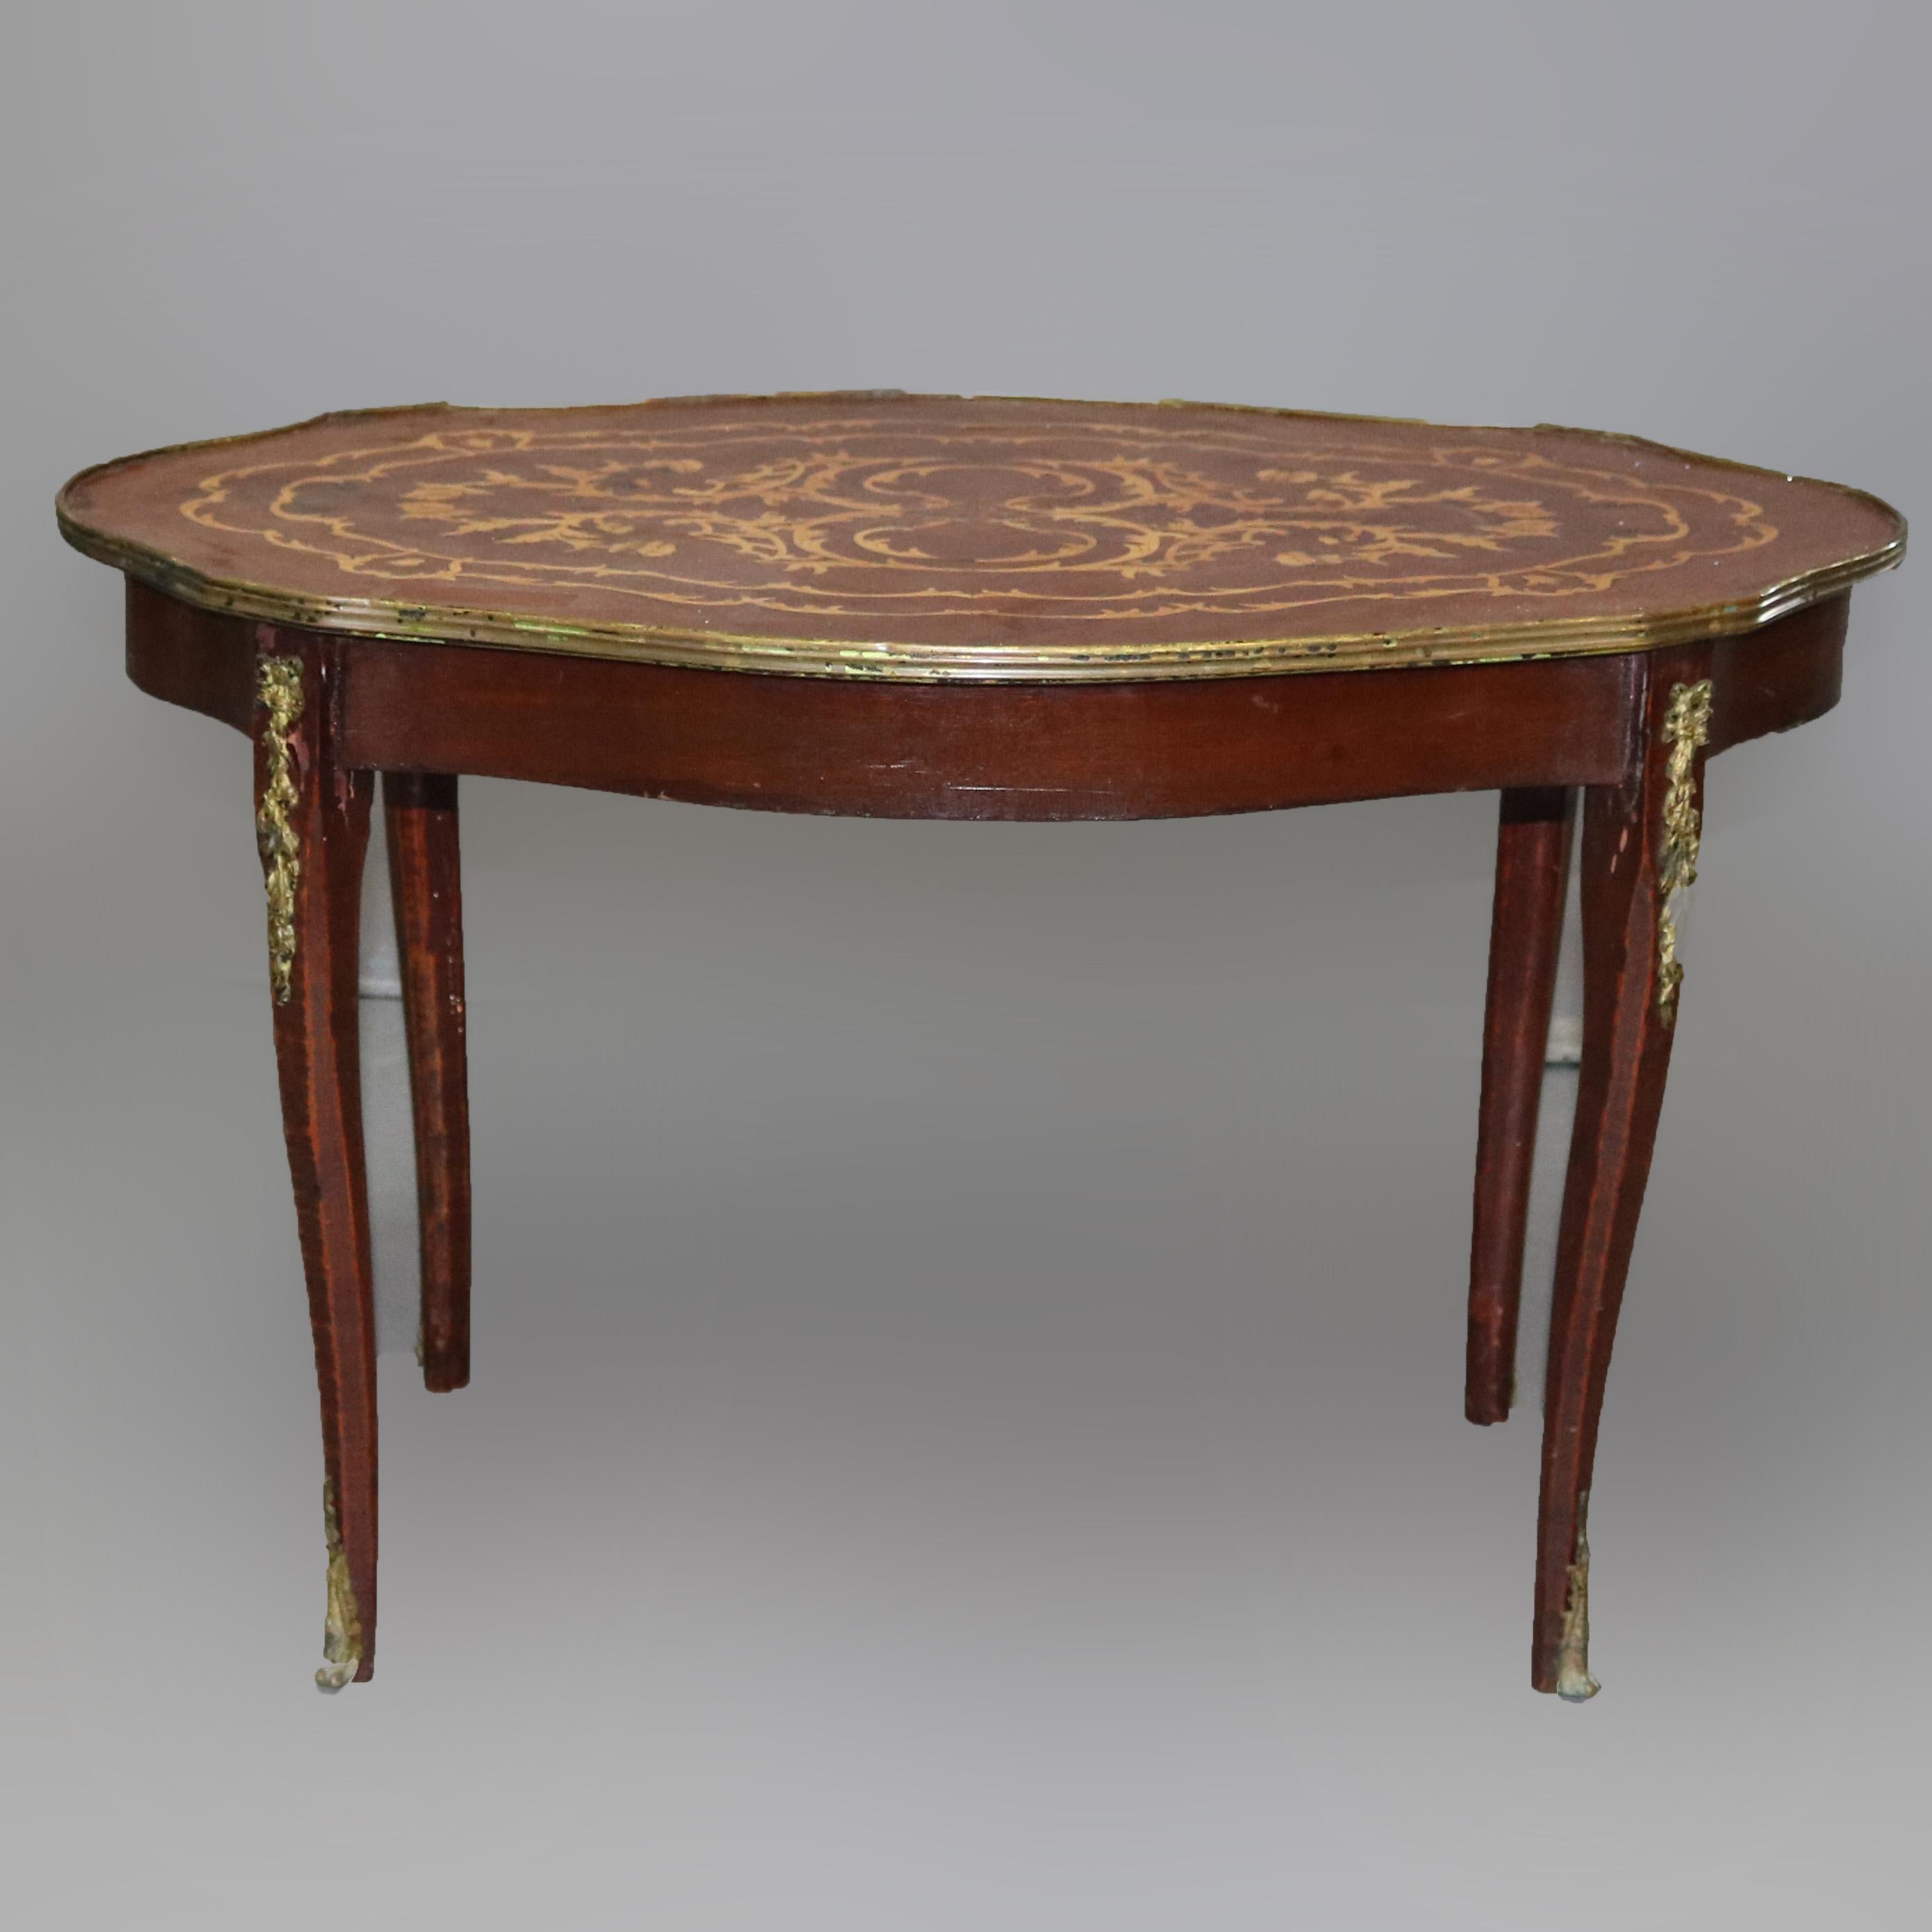 Vintage French Louis XVI style coffee table offers mahogany construction with shape top having scroll and foliate satinwood marquetry with bronze band raised on cabriole legs with foliate ormolu, reminiscent of Dutch marquetry, 20th century.